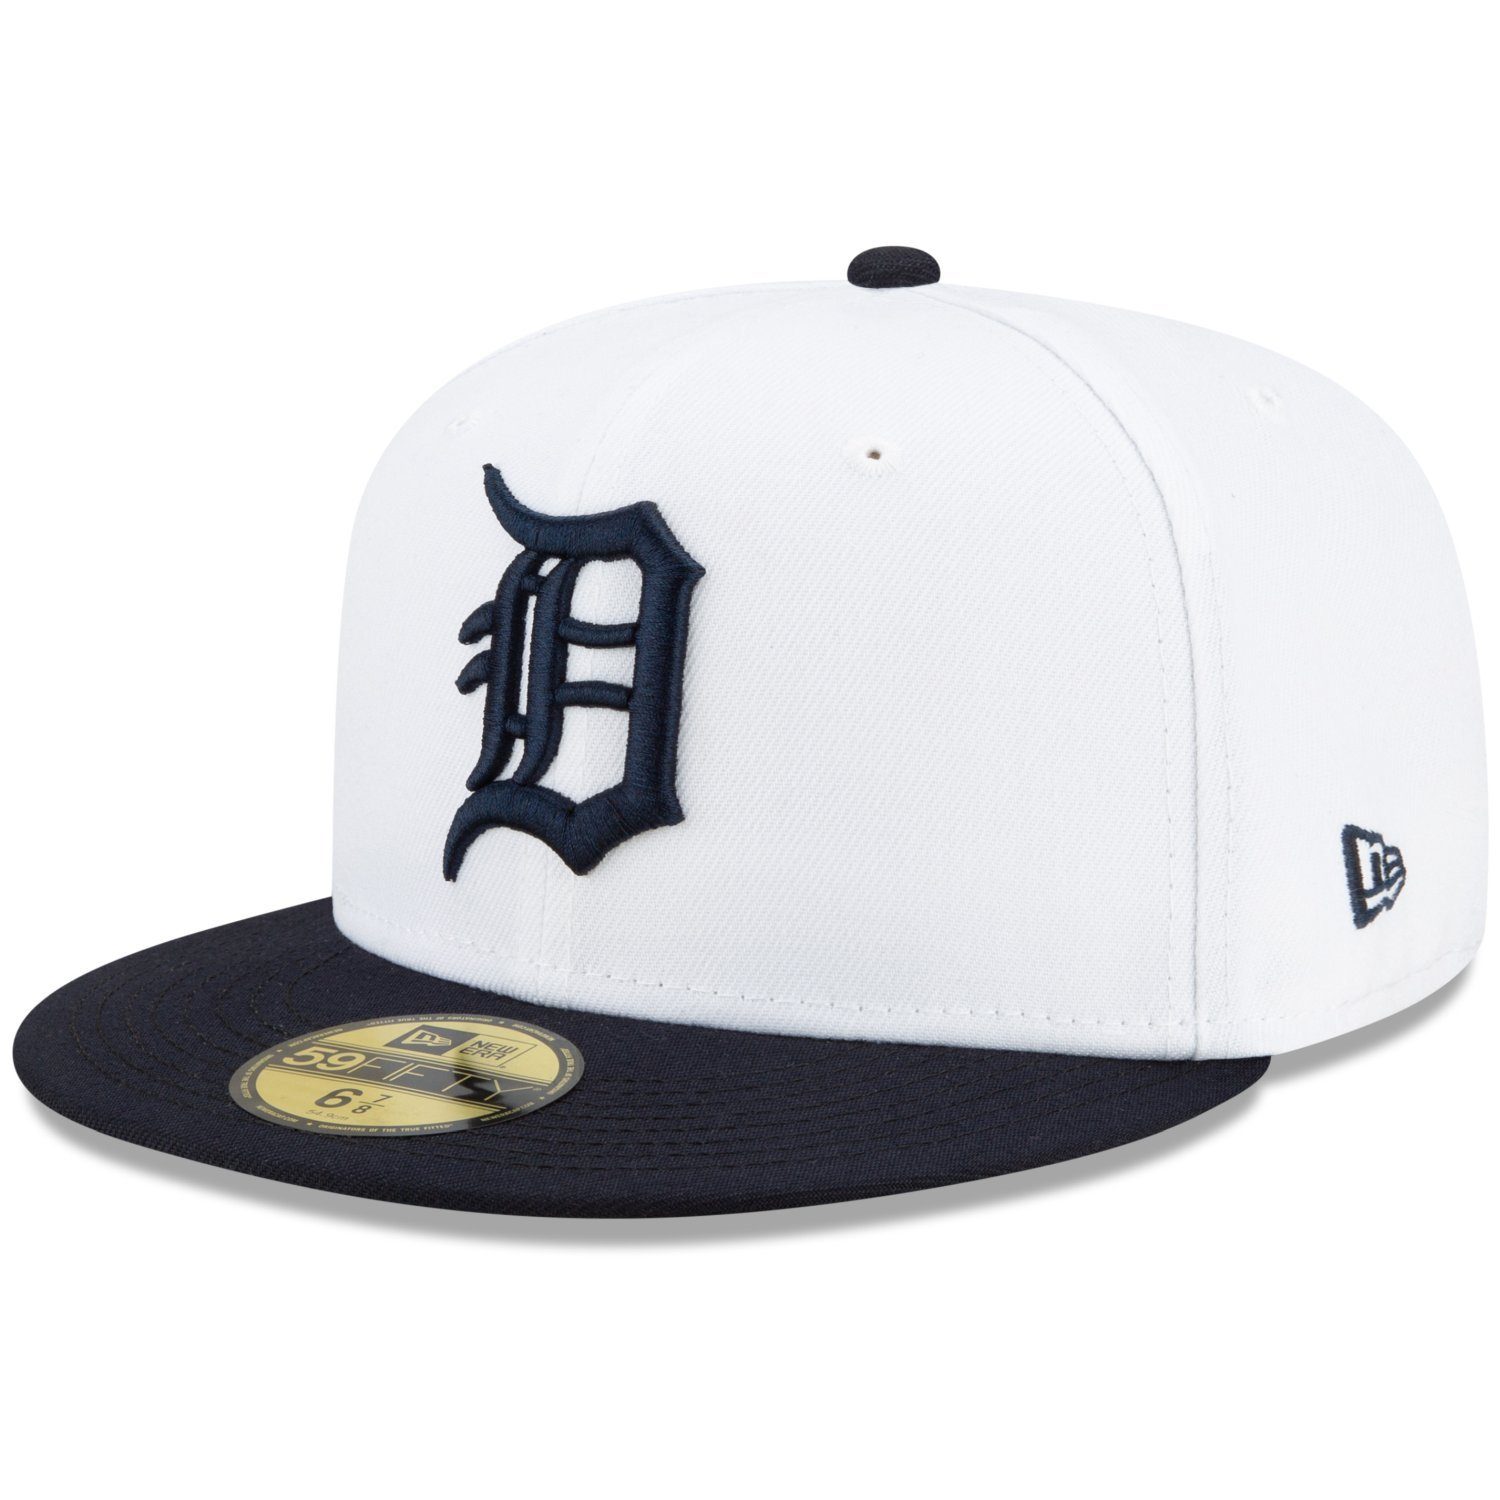 Era New WORLD Detroit 1984 Fitted Tigers Cap SERIES 59Fifty